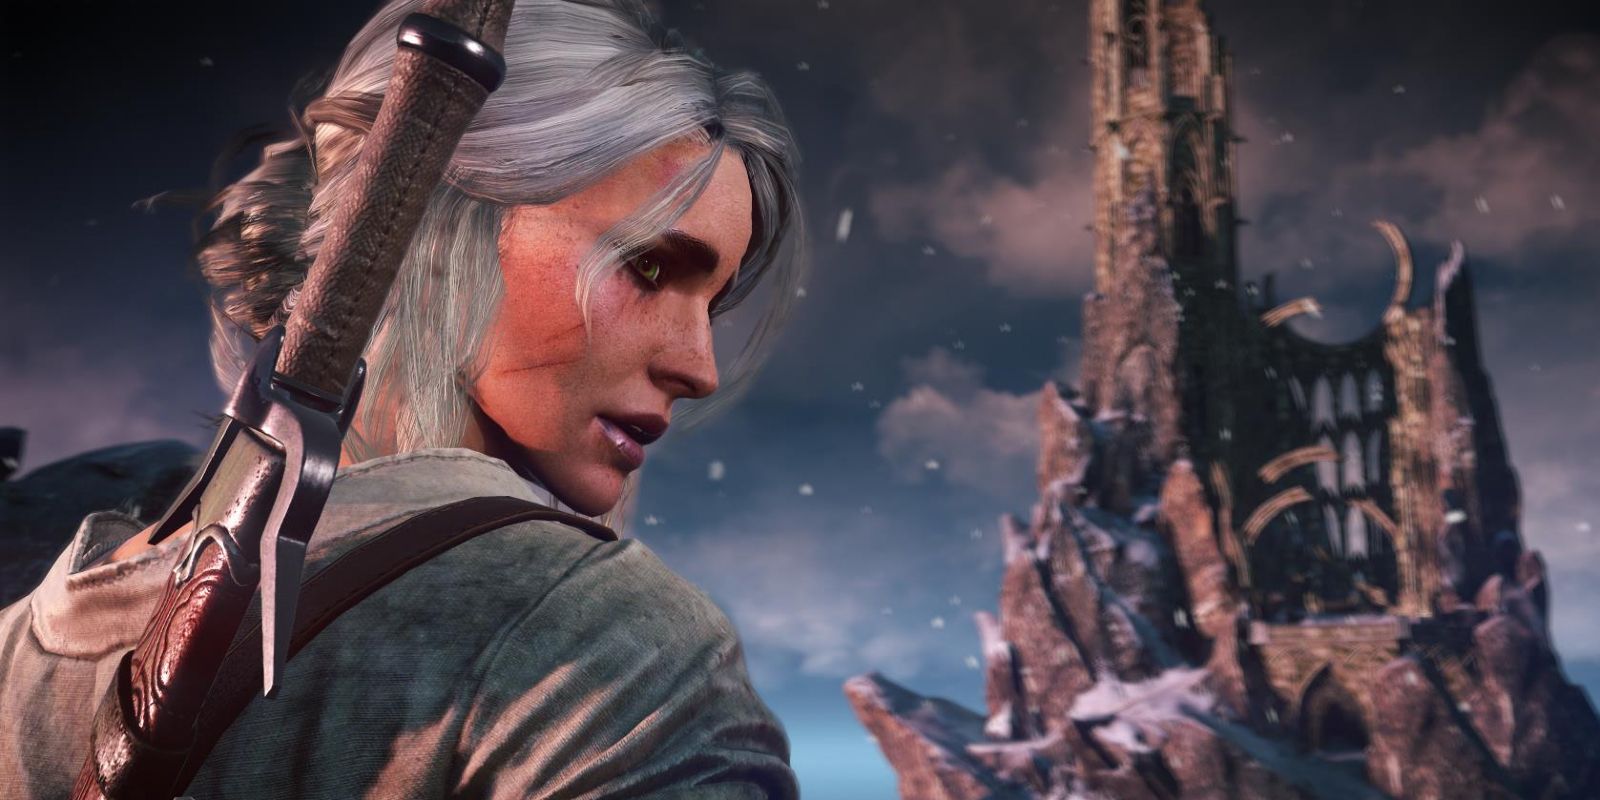 The Witcher 3 Endings Explained